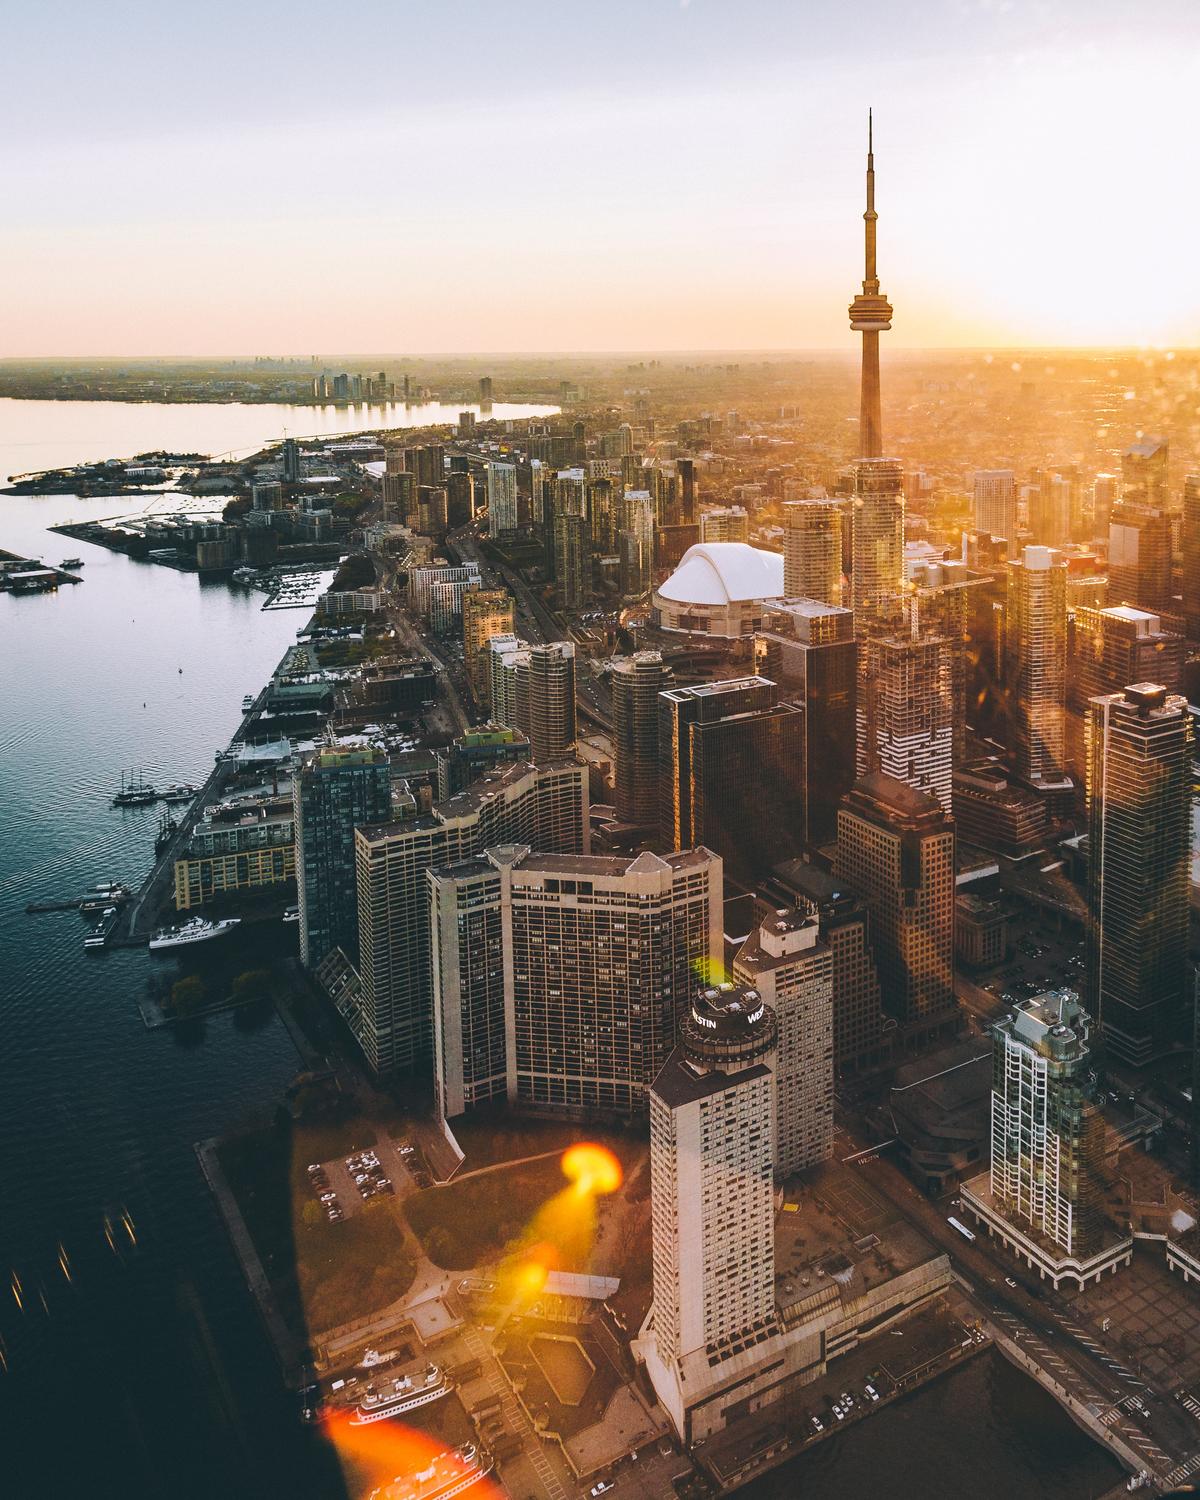 Downtown Toronto, as seen from the air on a helicopter tour, at sunset. (mwangi gatheca/Unsplash)